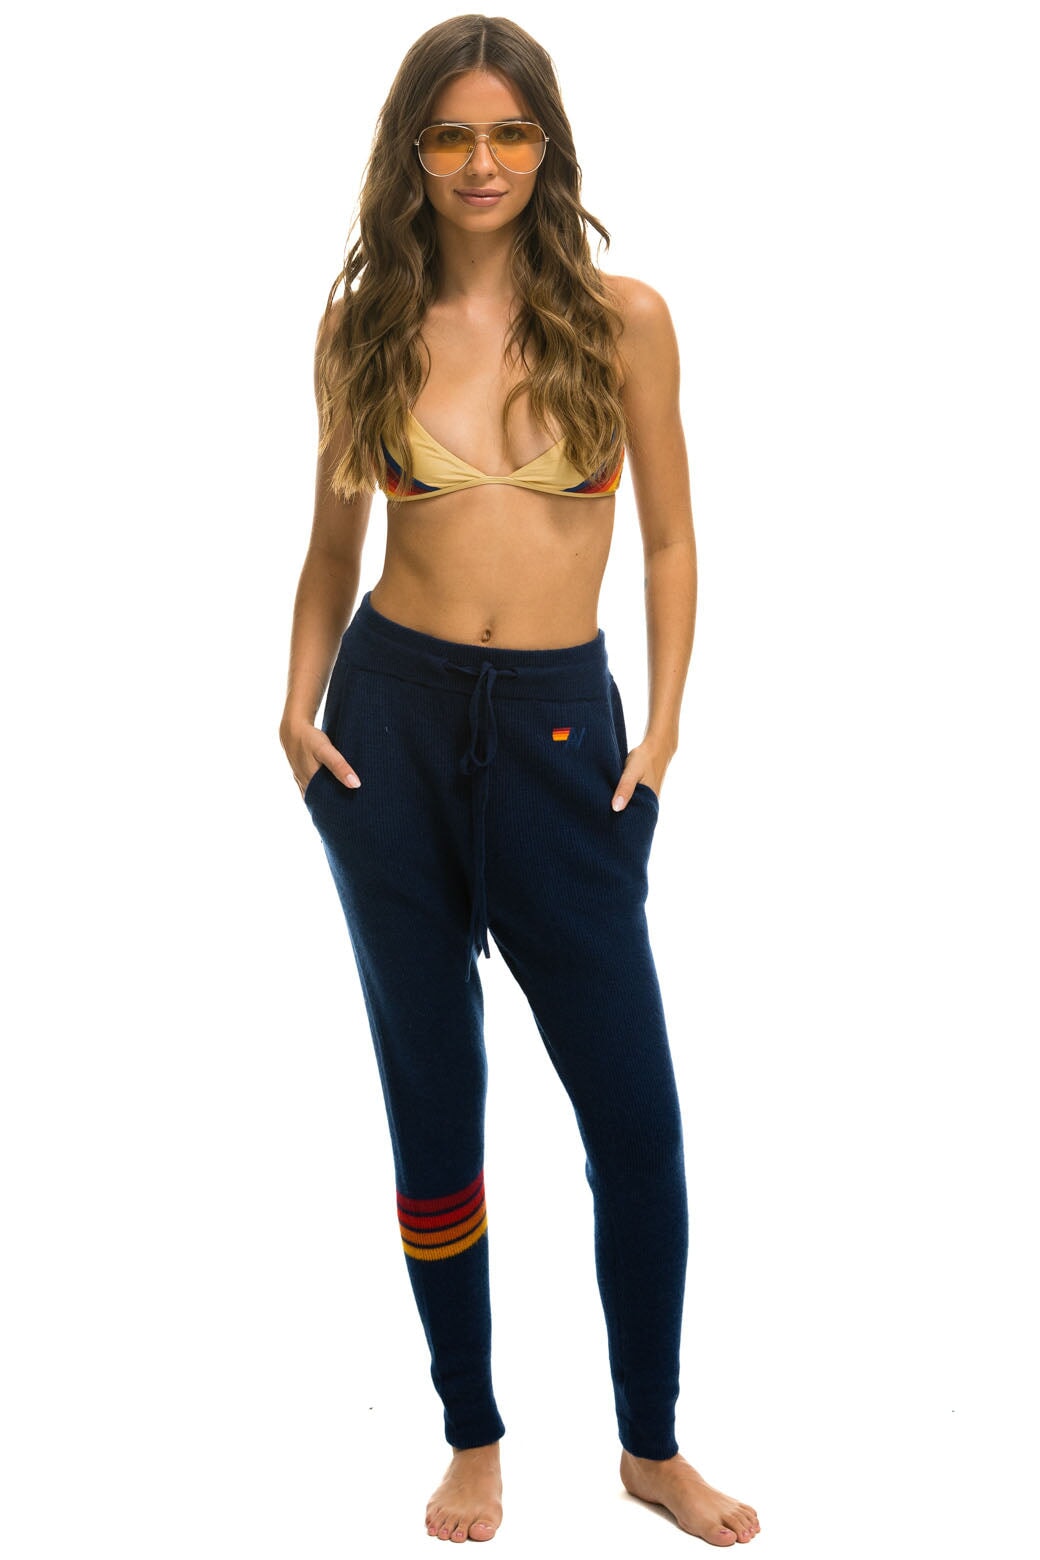 WOMEN'S RAINBOW 4 STRIPE CASHMERE RELAXED FIT PANT - MIDNIGHT Women's Sweatpants Aviator Nation 